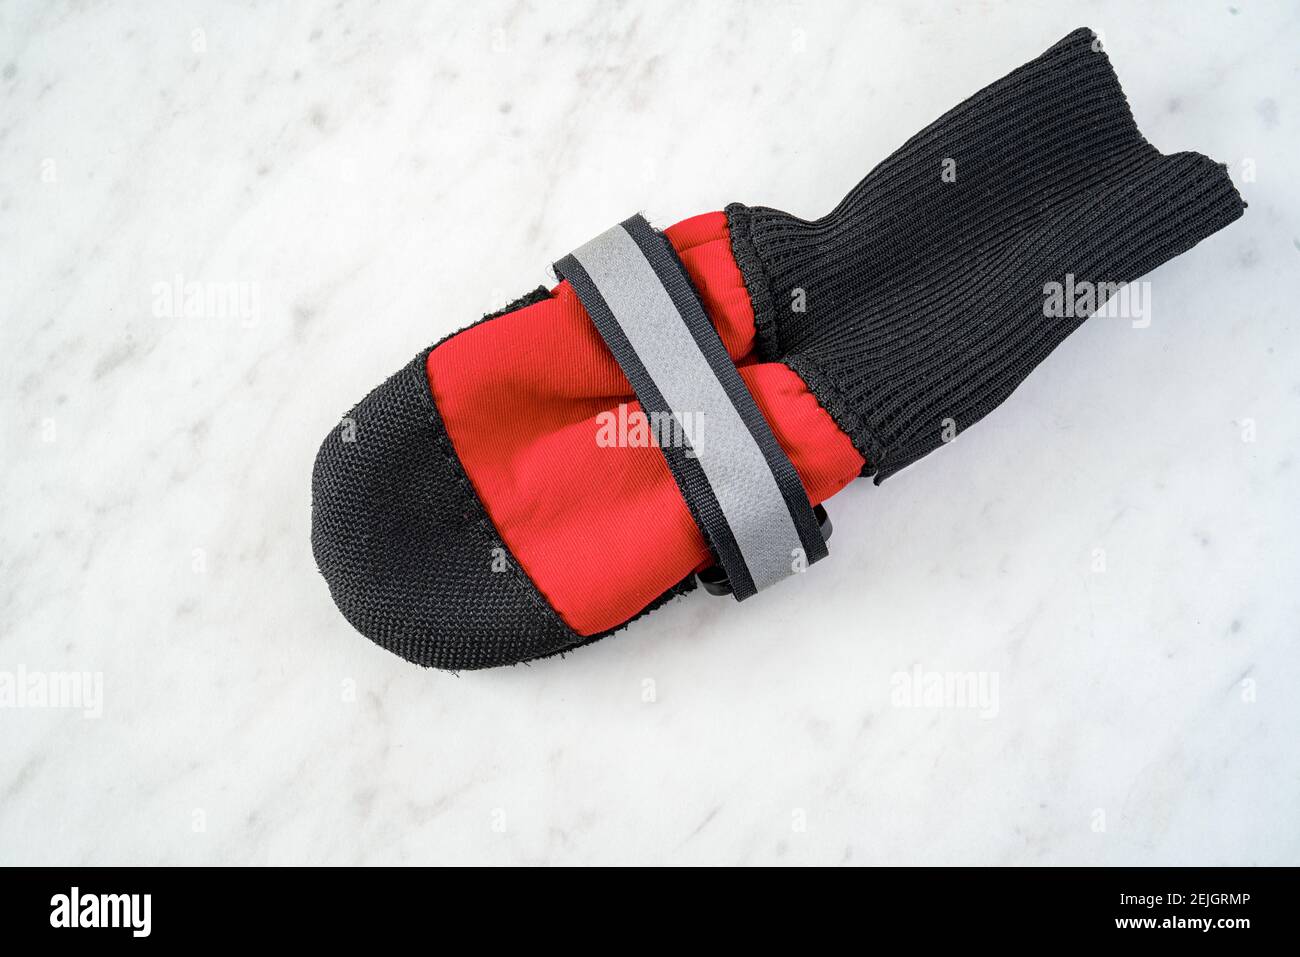 Dog boots on a white marble background. Stock Photo